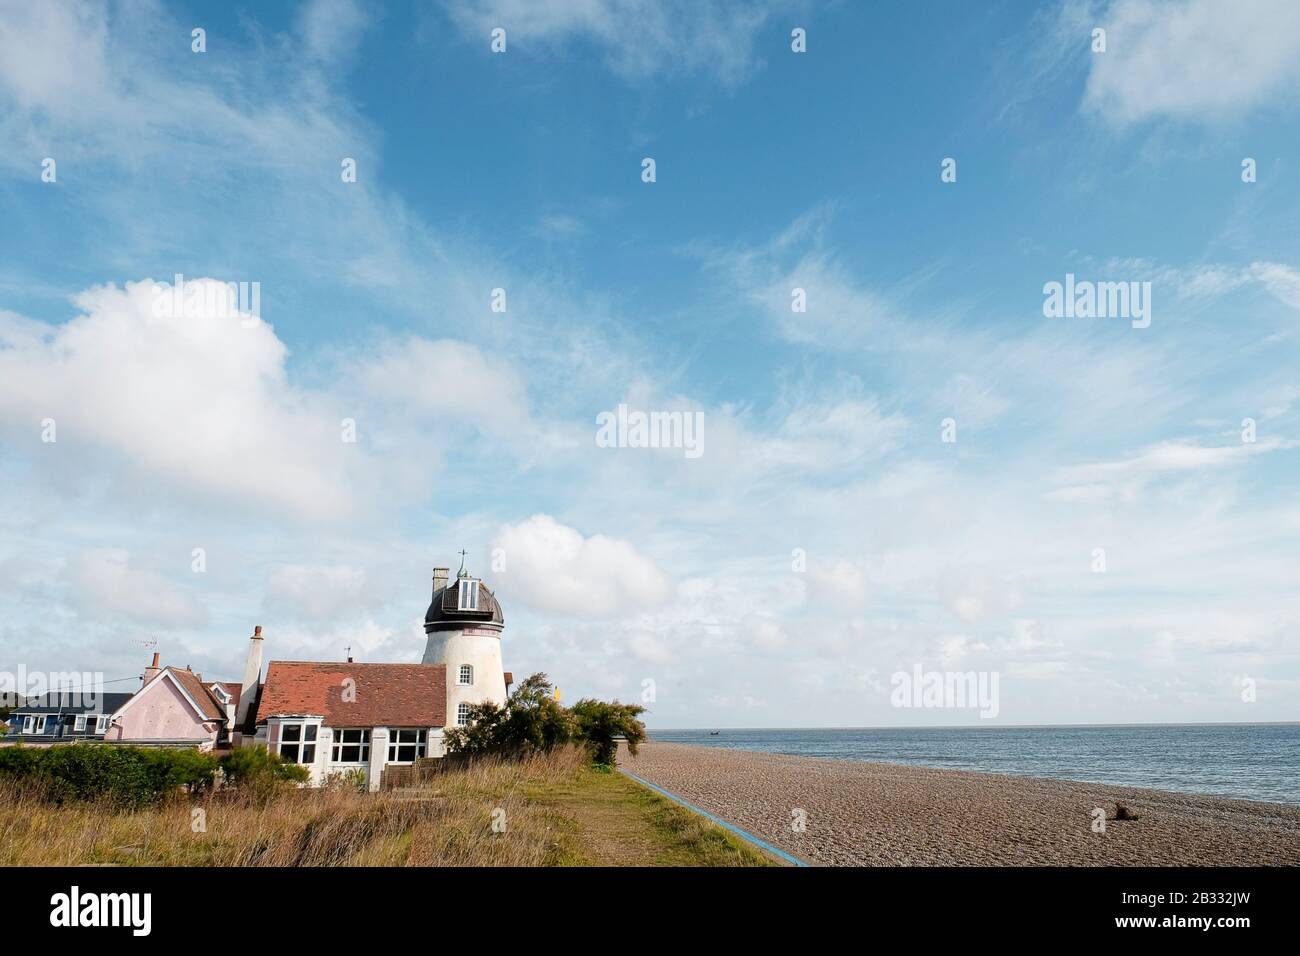 The Old Mill House on Aldeburgh beach, Aldeburgh, Suffolk UK. Stock Photo